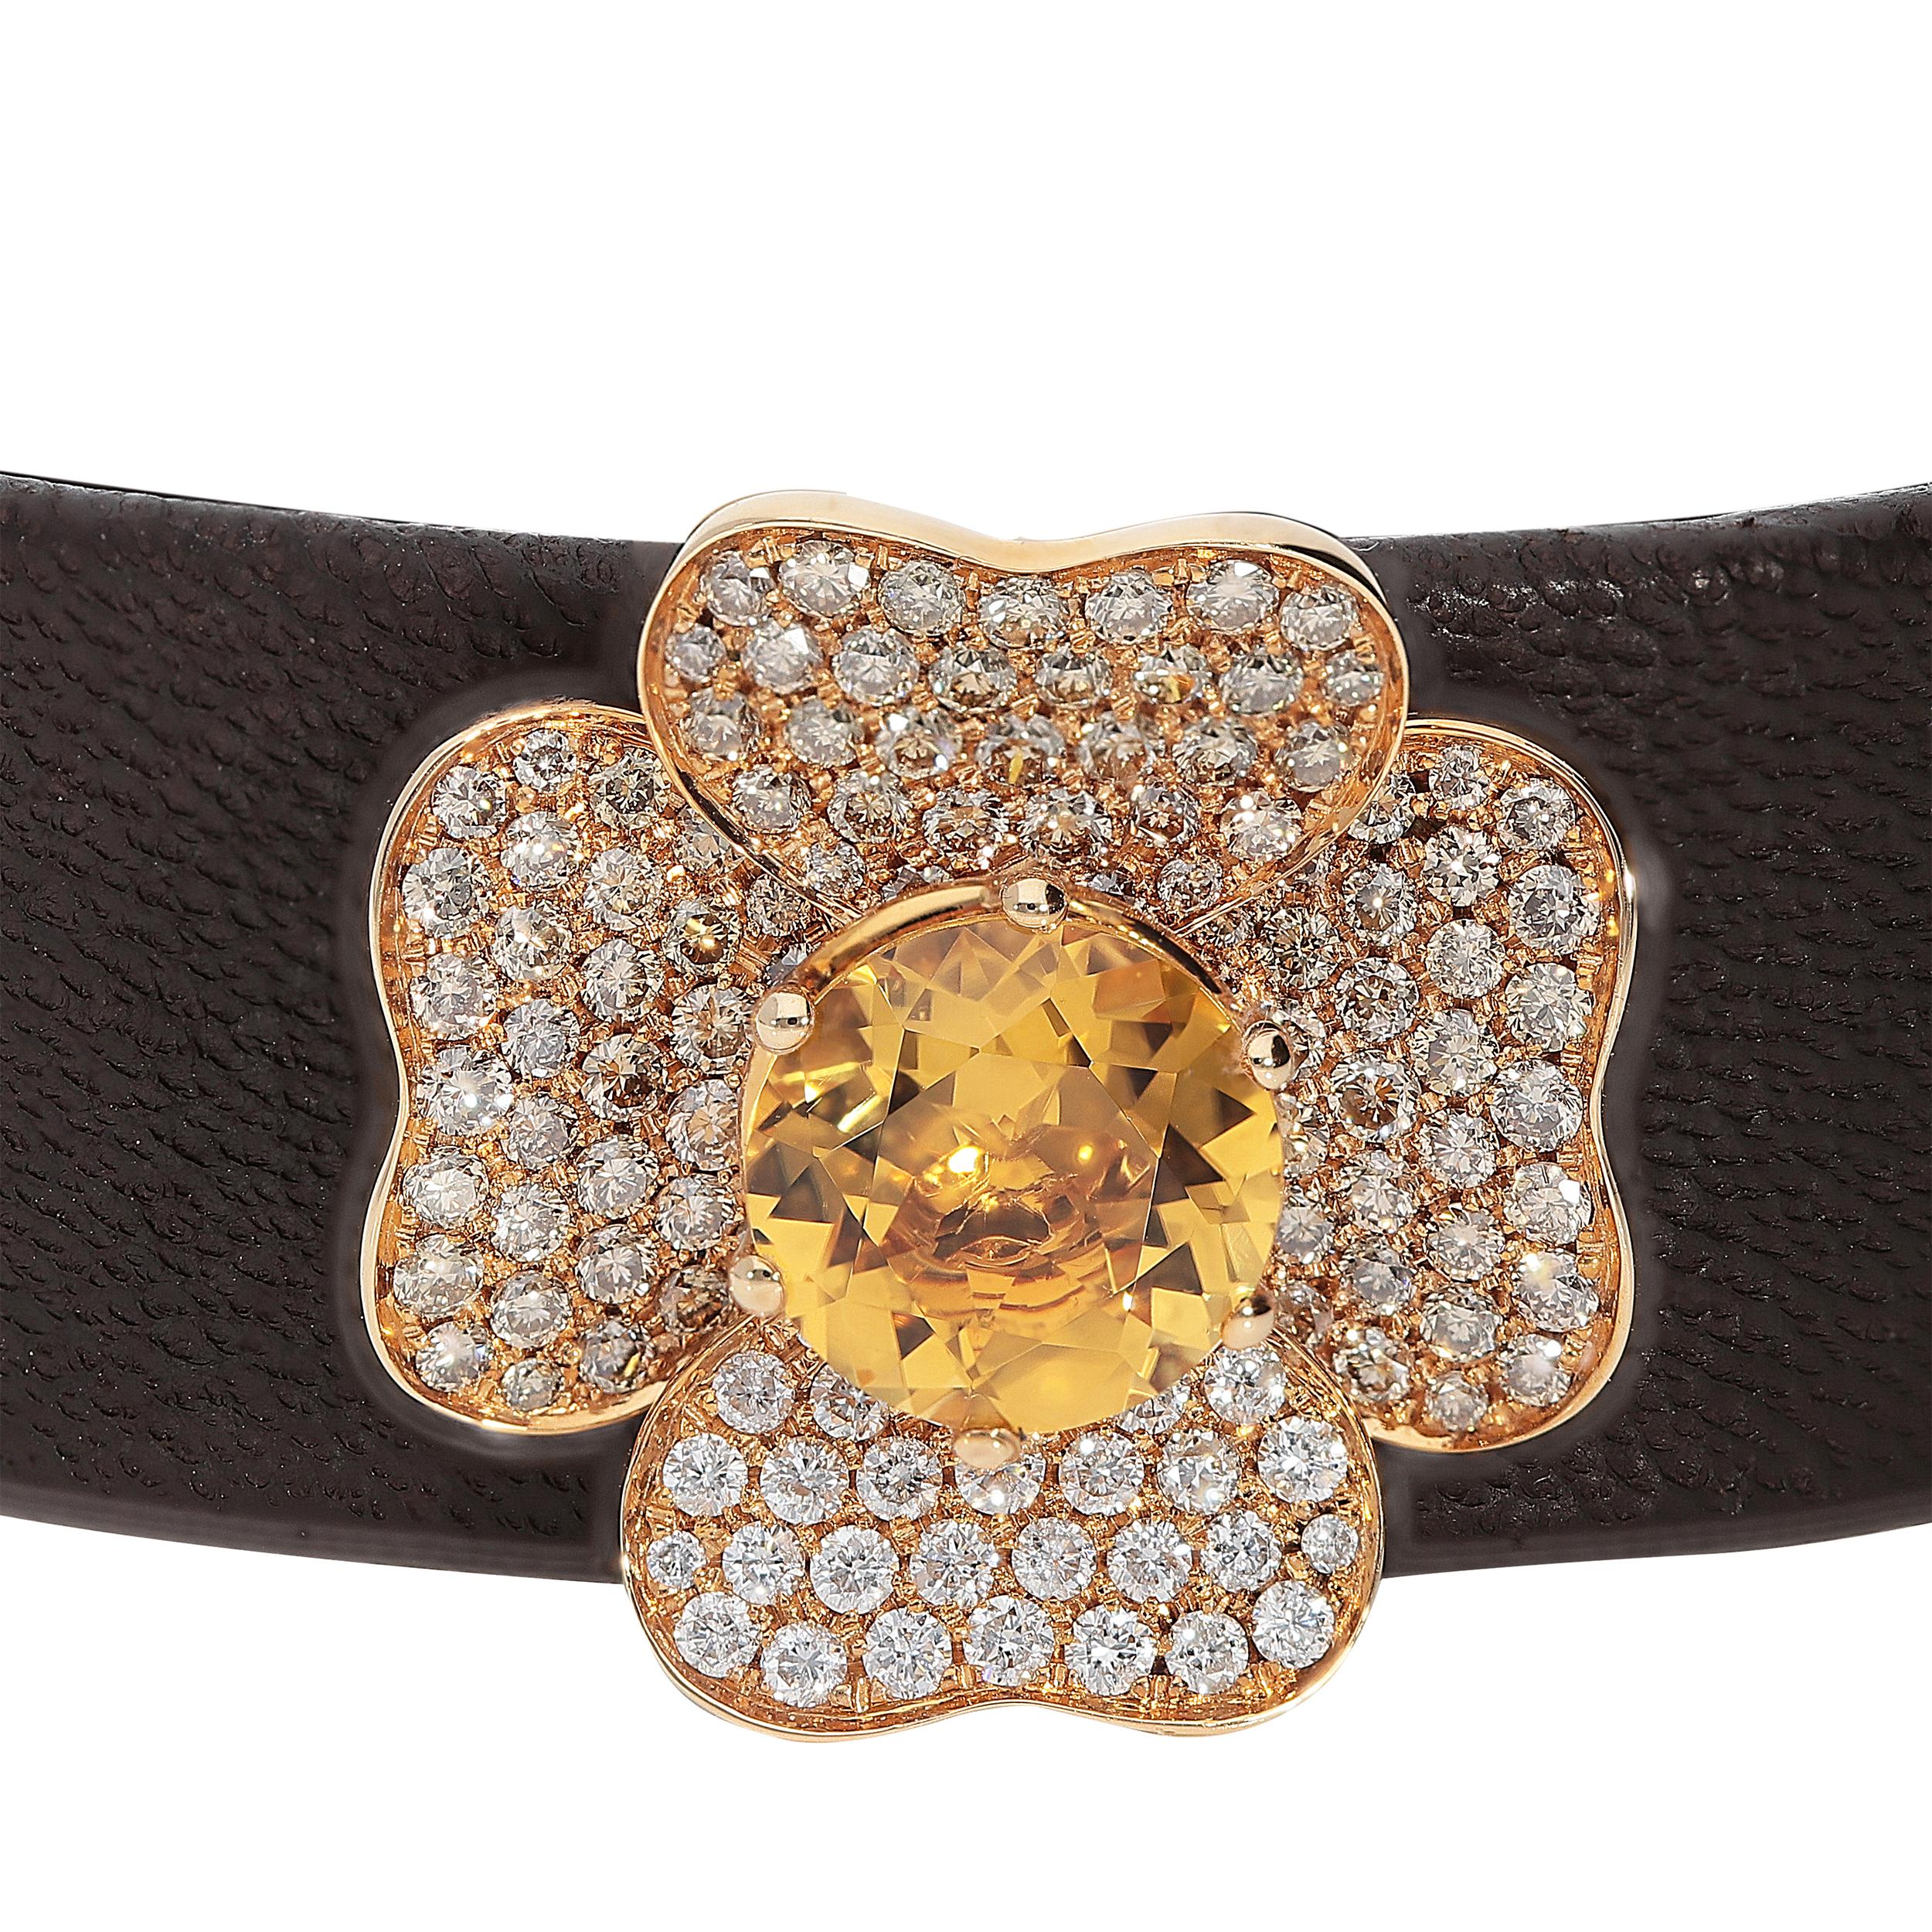 Fashion bracelet in 18kt pink gold for 7,10 grams with flexible core brown leather.
The height of the leather is 1,60 centimeters and the wrist size is 5x4 centimeters.
The flower has got a stunning citrine quartz as central for 1,63 carats and 3